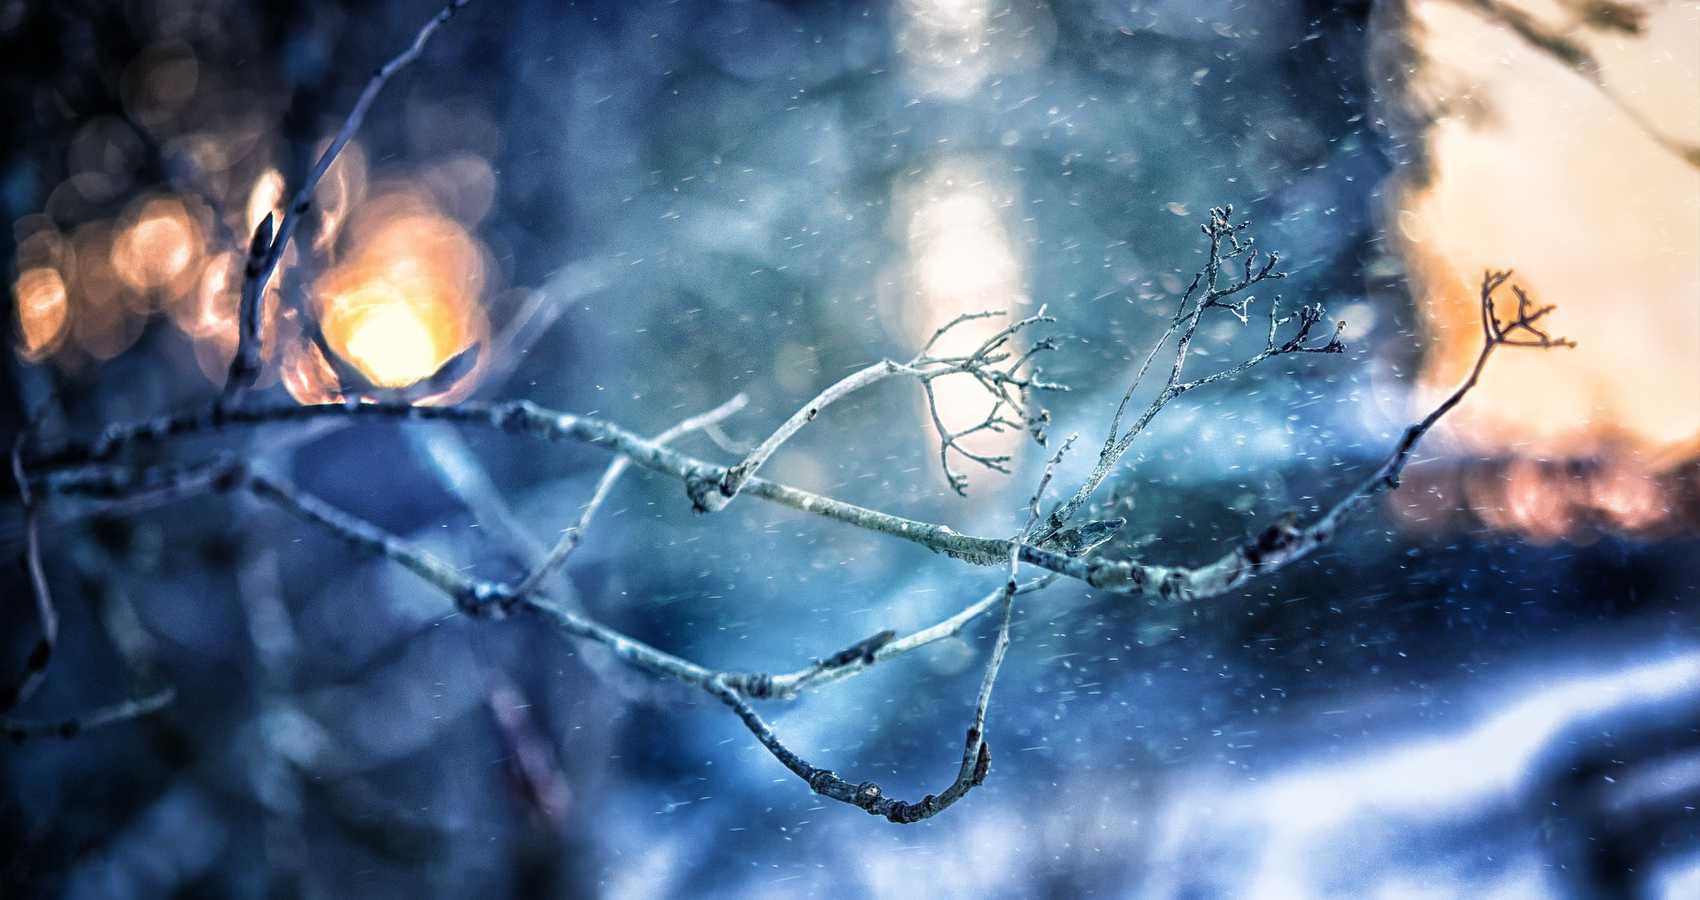 The Ice Storm, flash fiction by NT Franklin at Spillwords.com